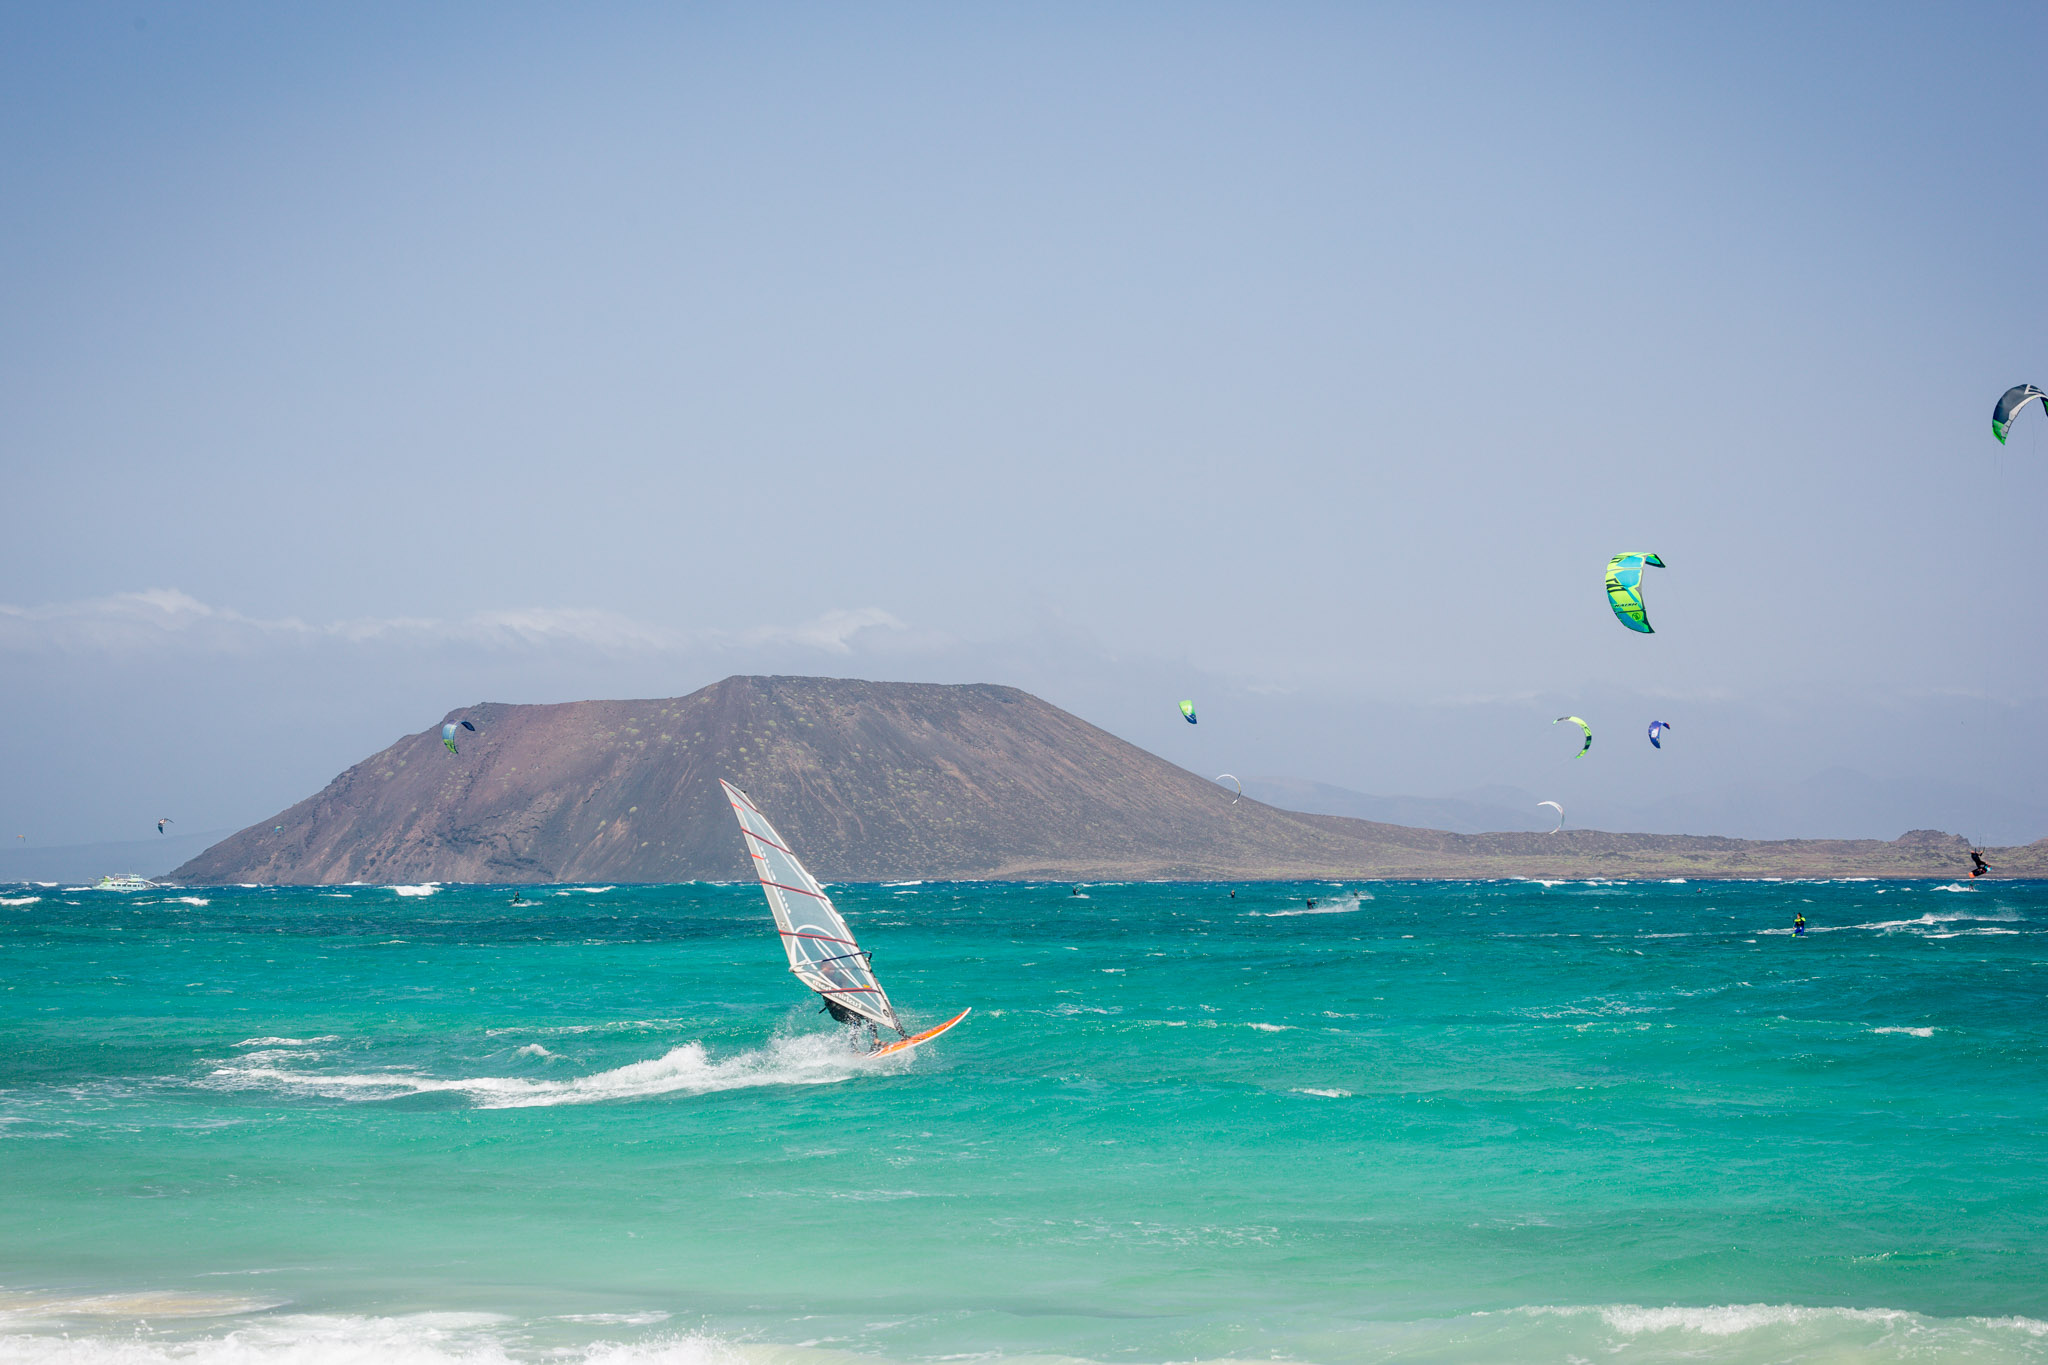 Try your hand at windsurfing